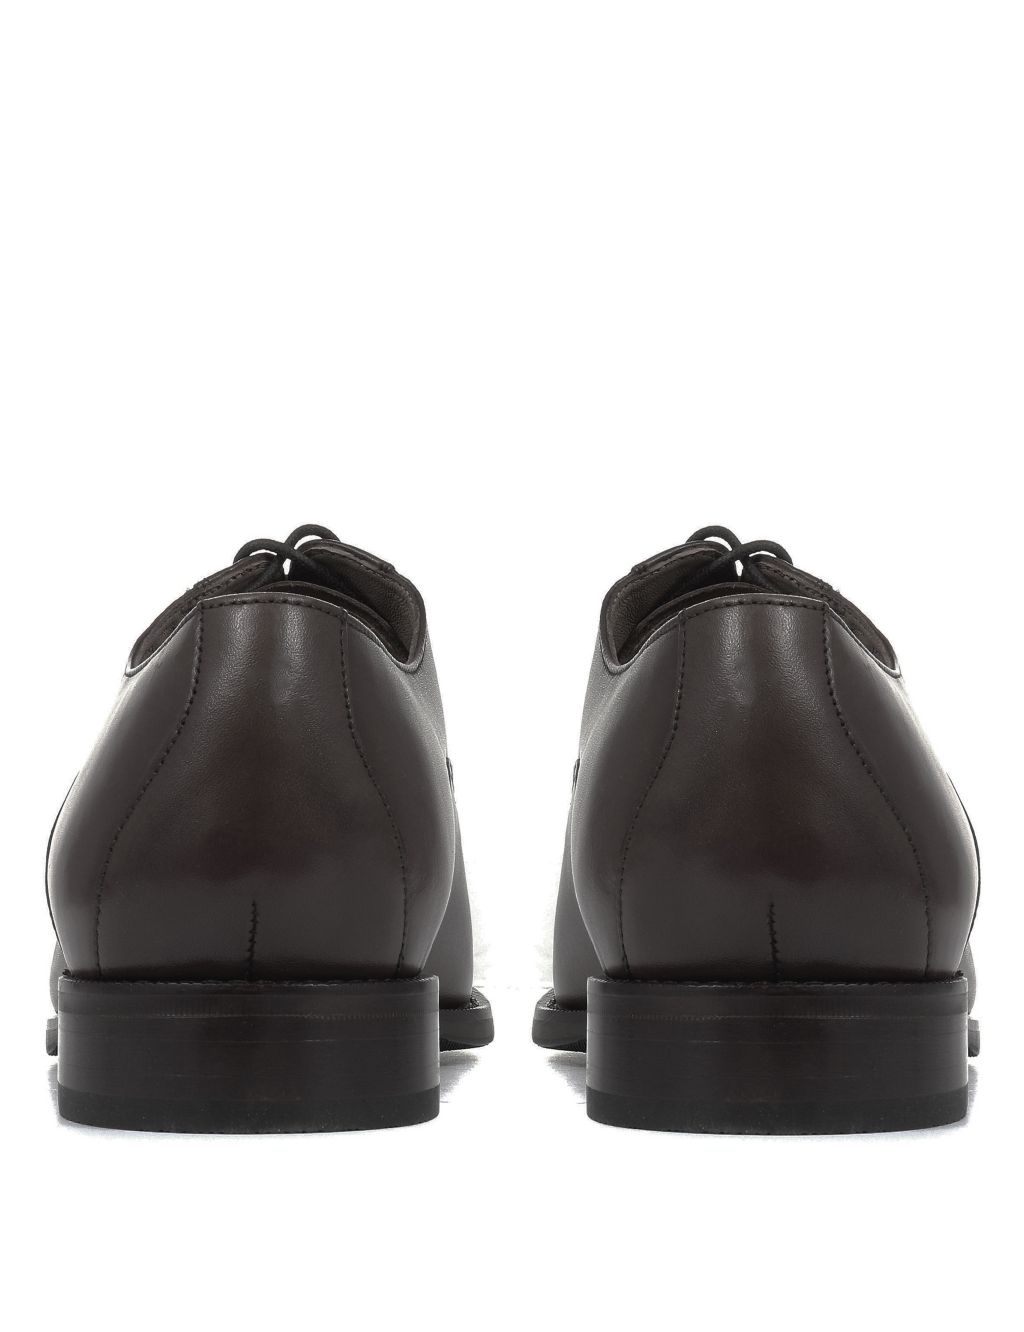 Wide Fit Leather Oxford Shoes image 4